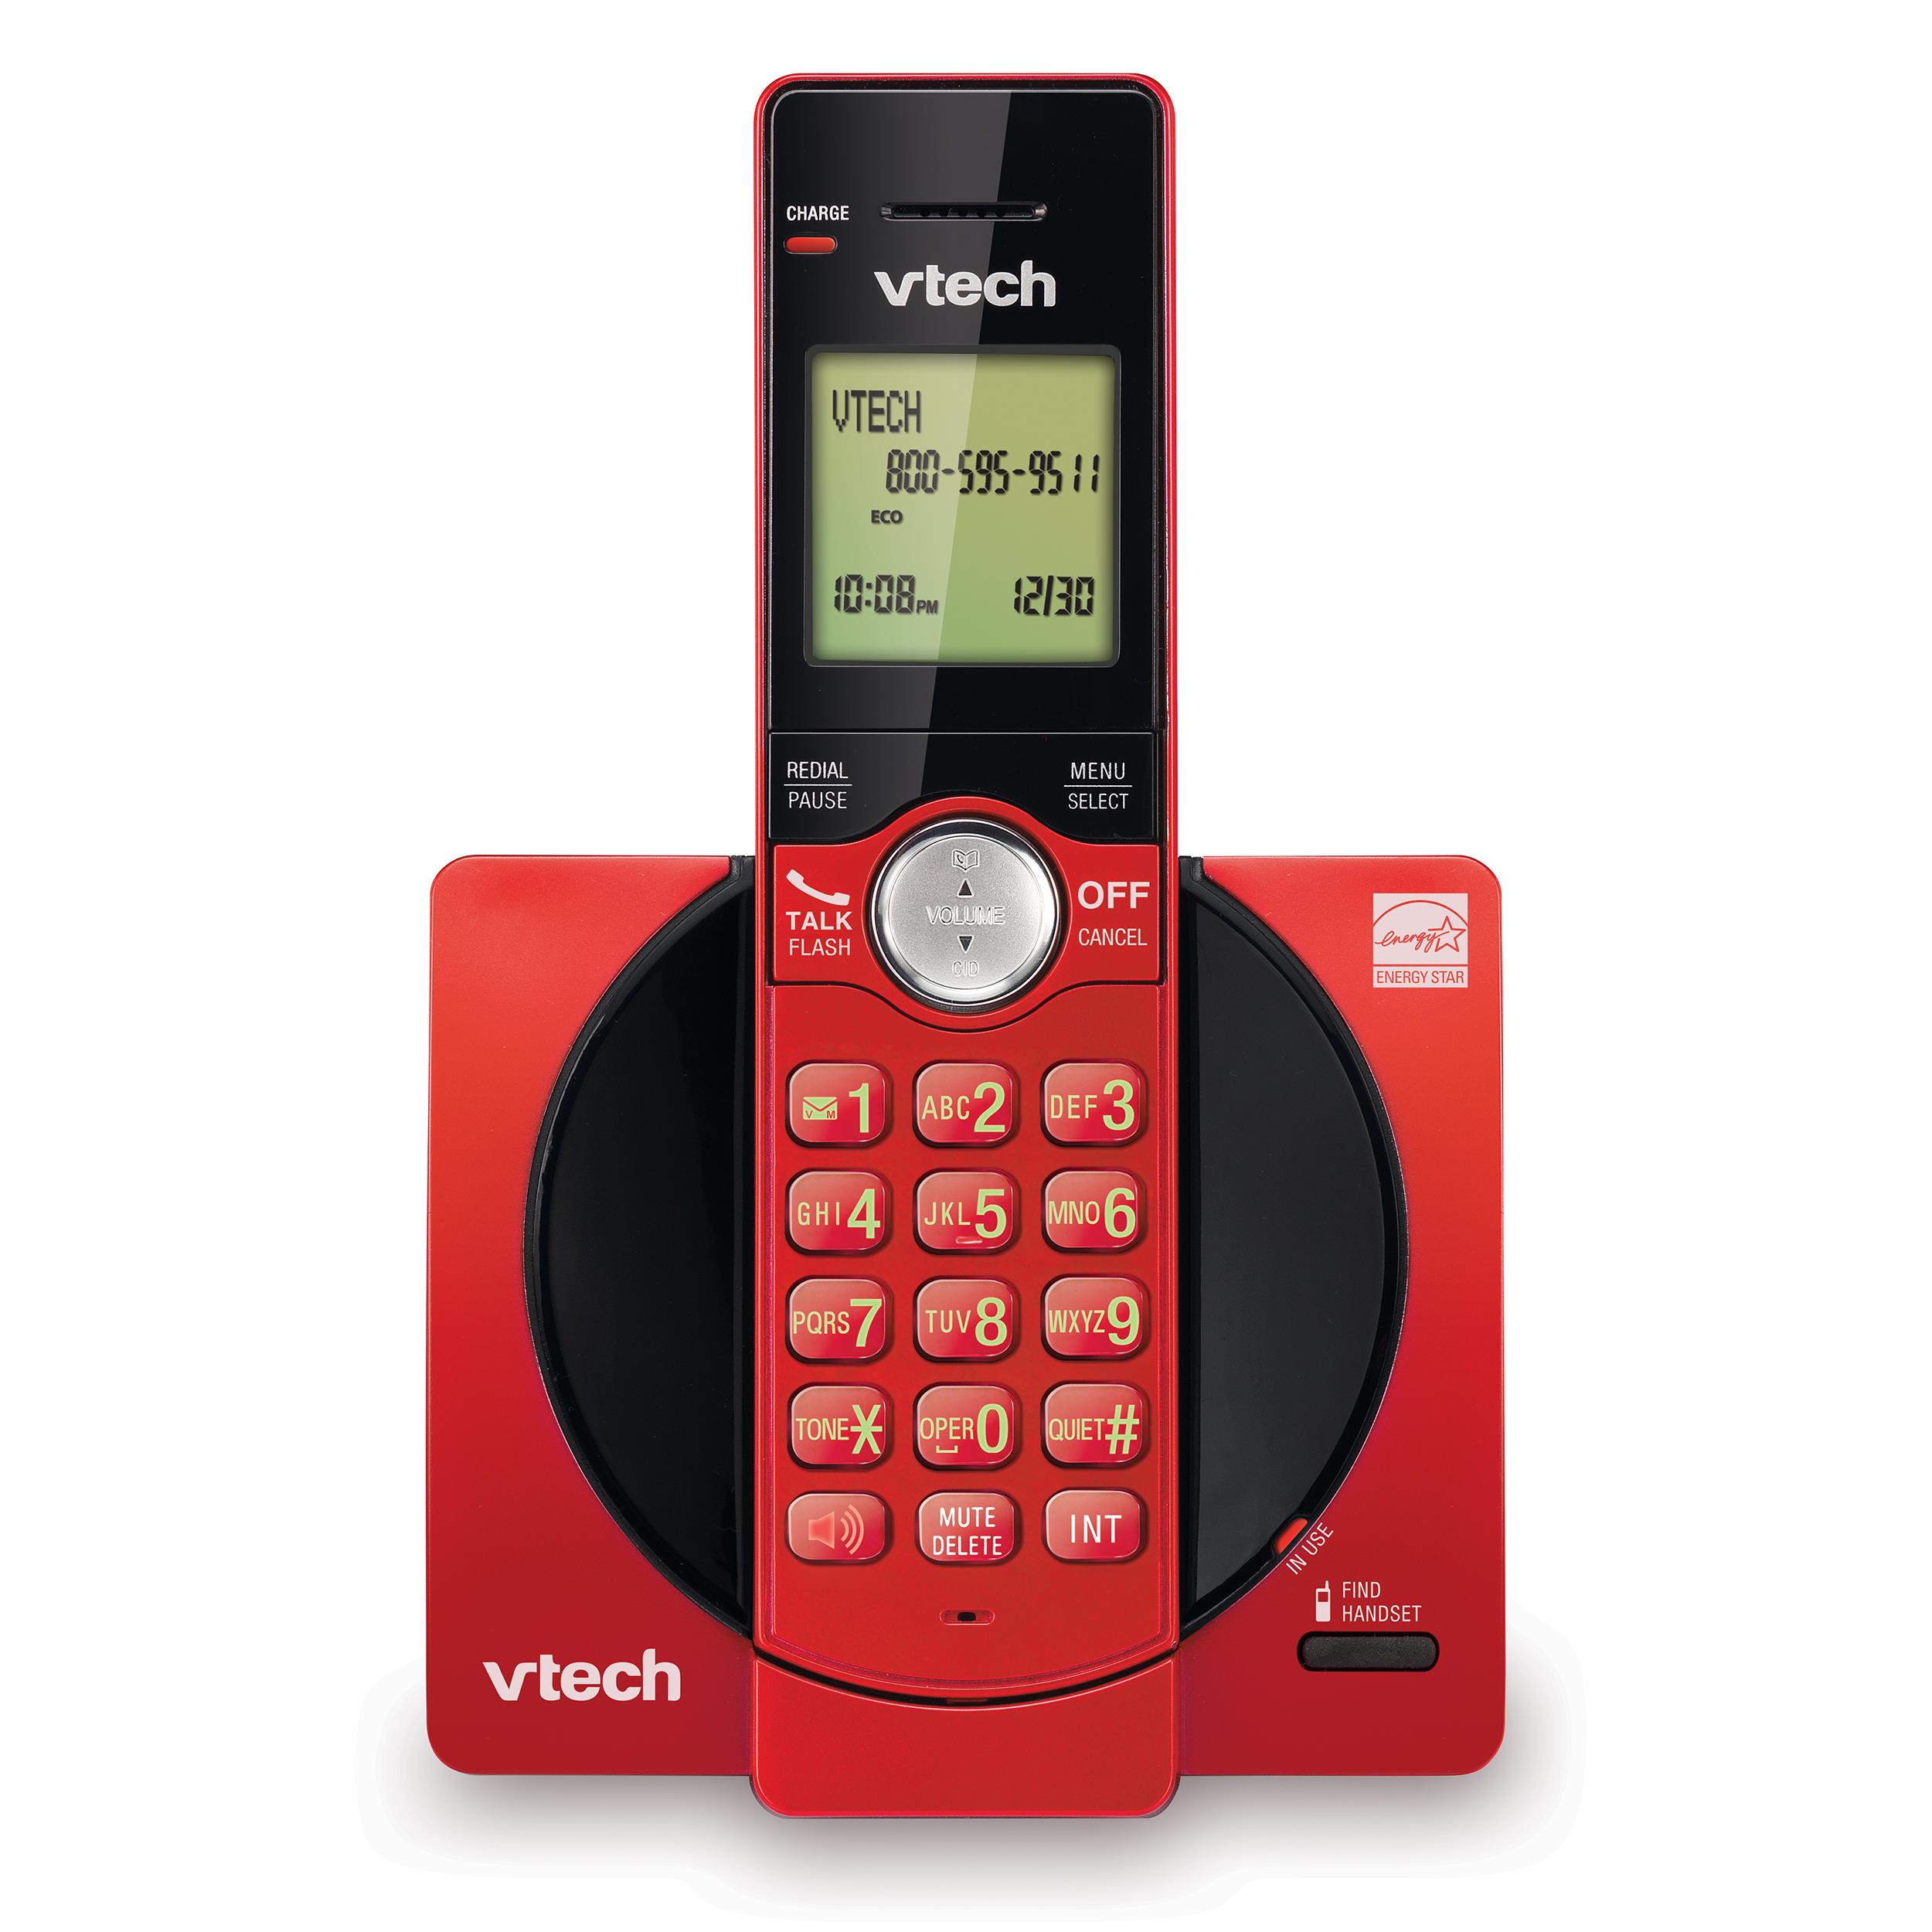 VTech CS6919-16 DECT 6.0 Cordless Phone with Caller ID and Handset Speakerphone, Red - image 1 of 3